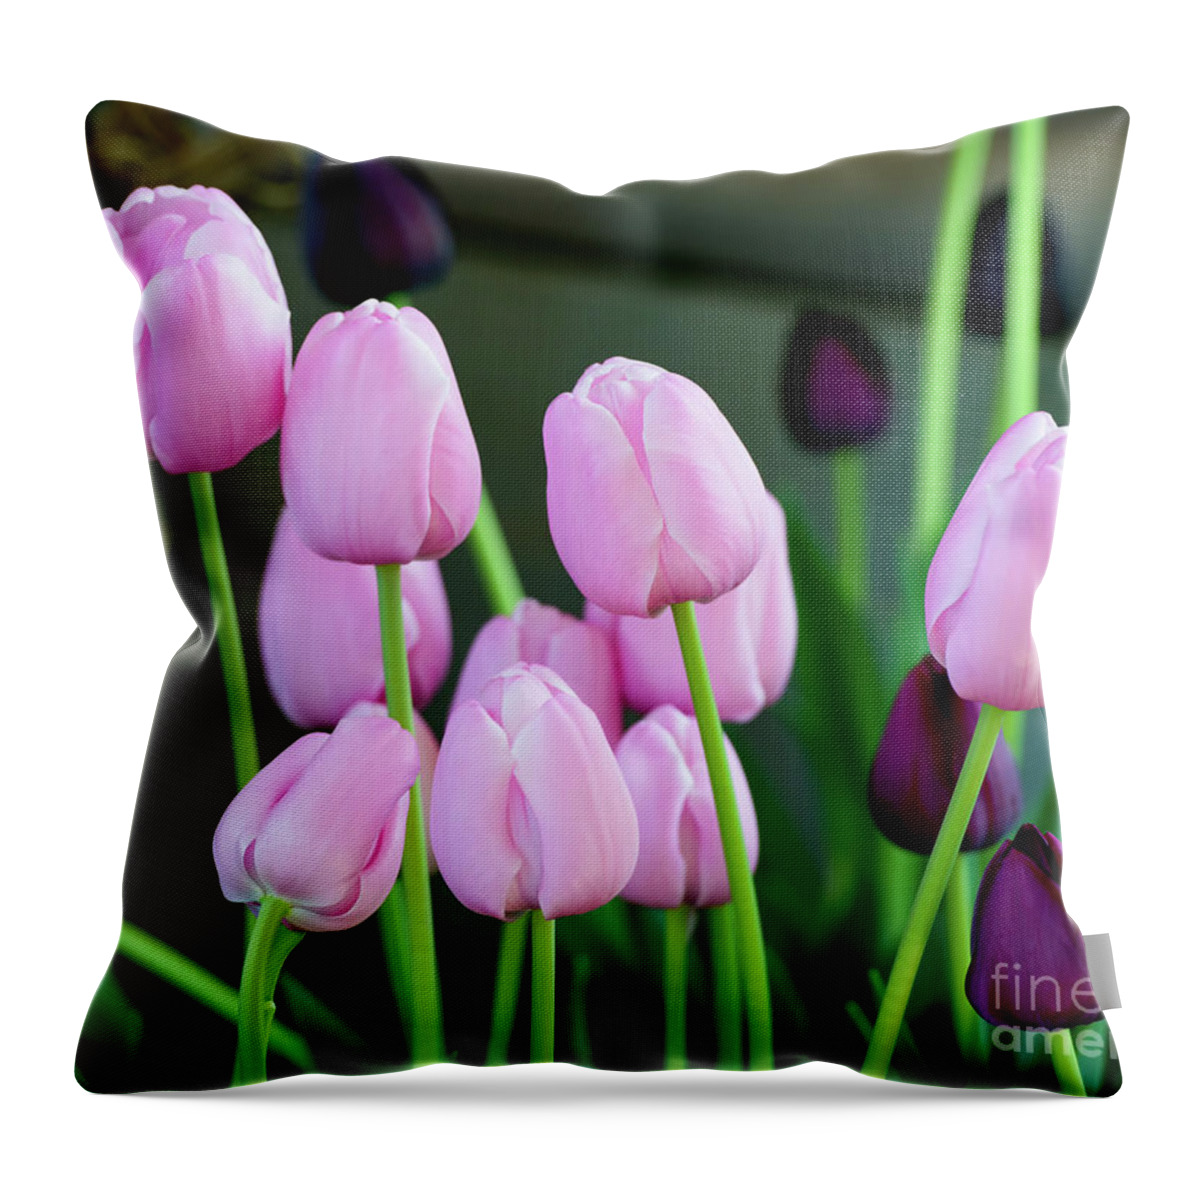 Pink Tulips Throw Pillow featuring the photograph Pink Tulips, 1 by Glenn Franco Simmons